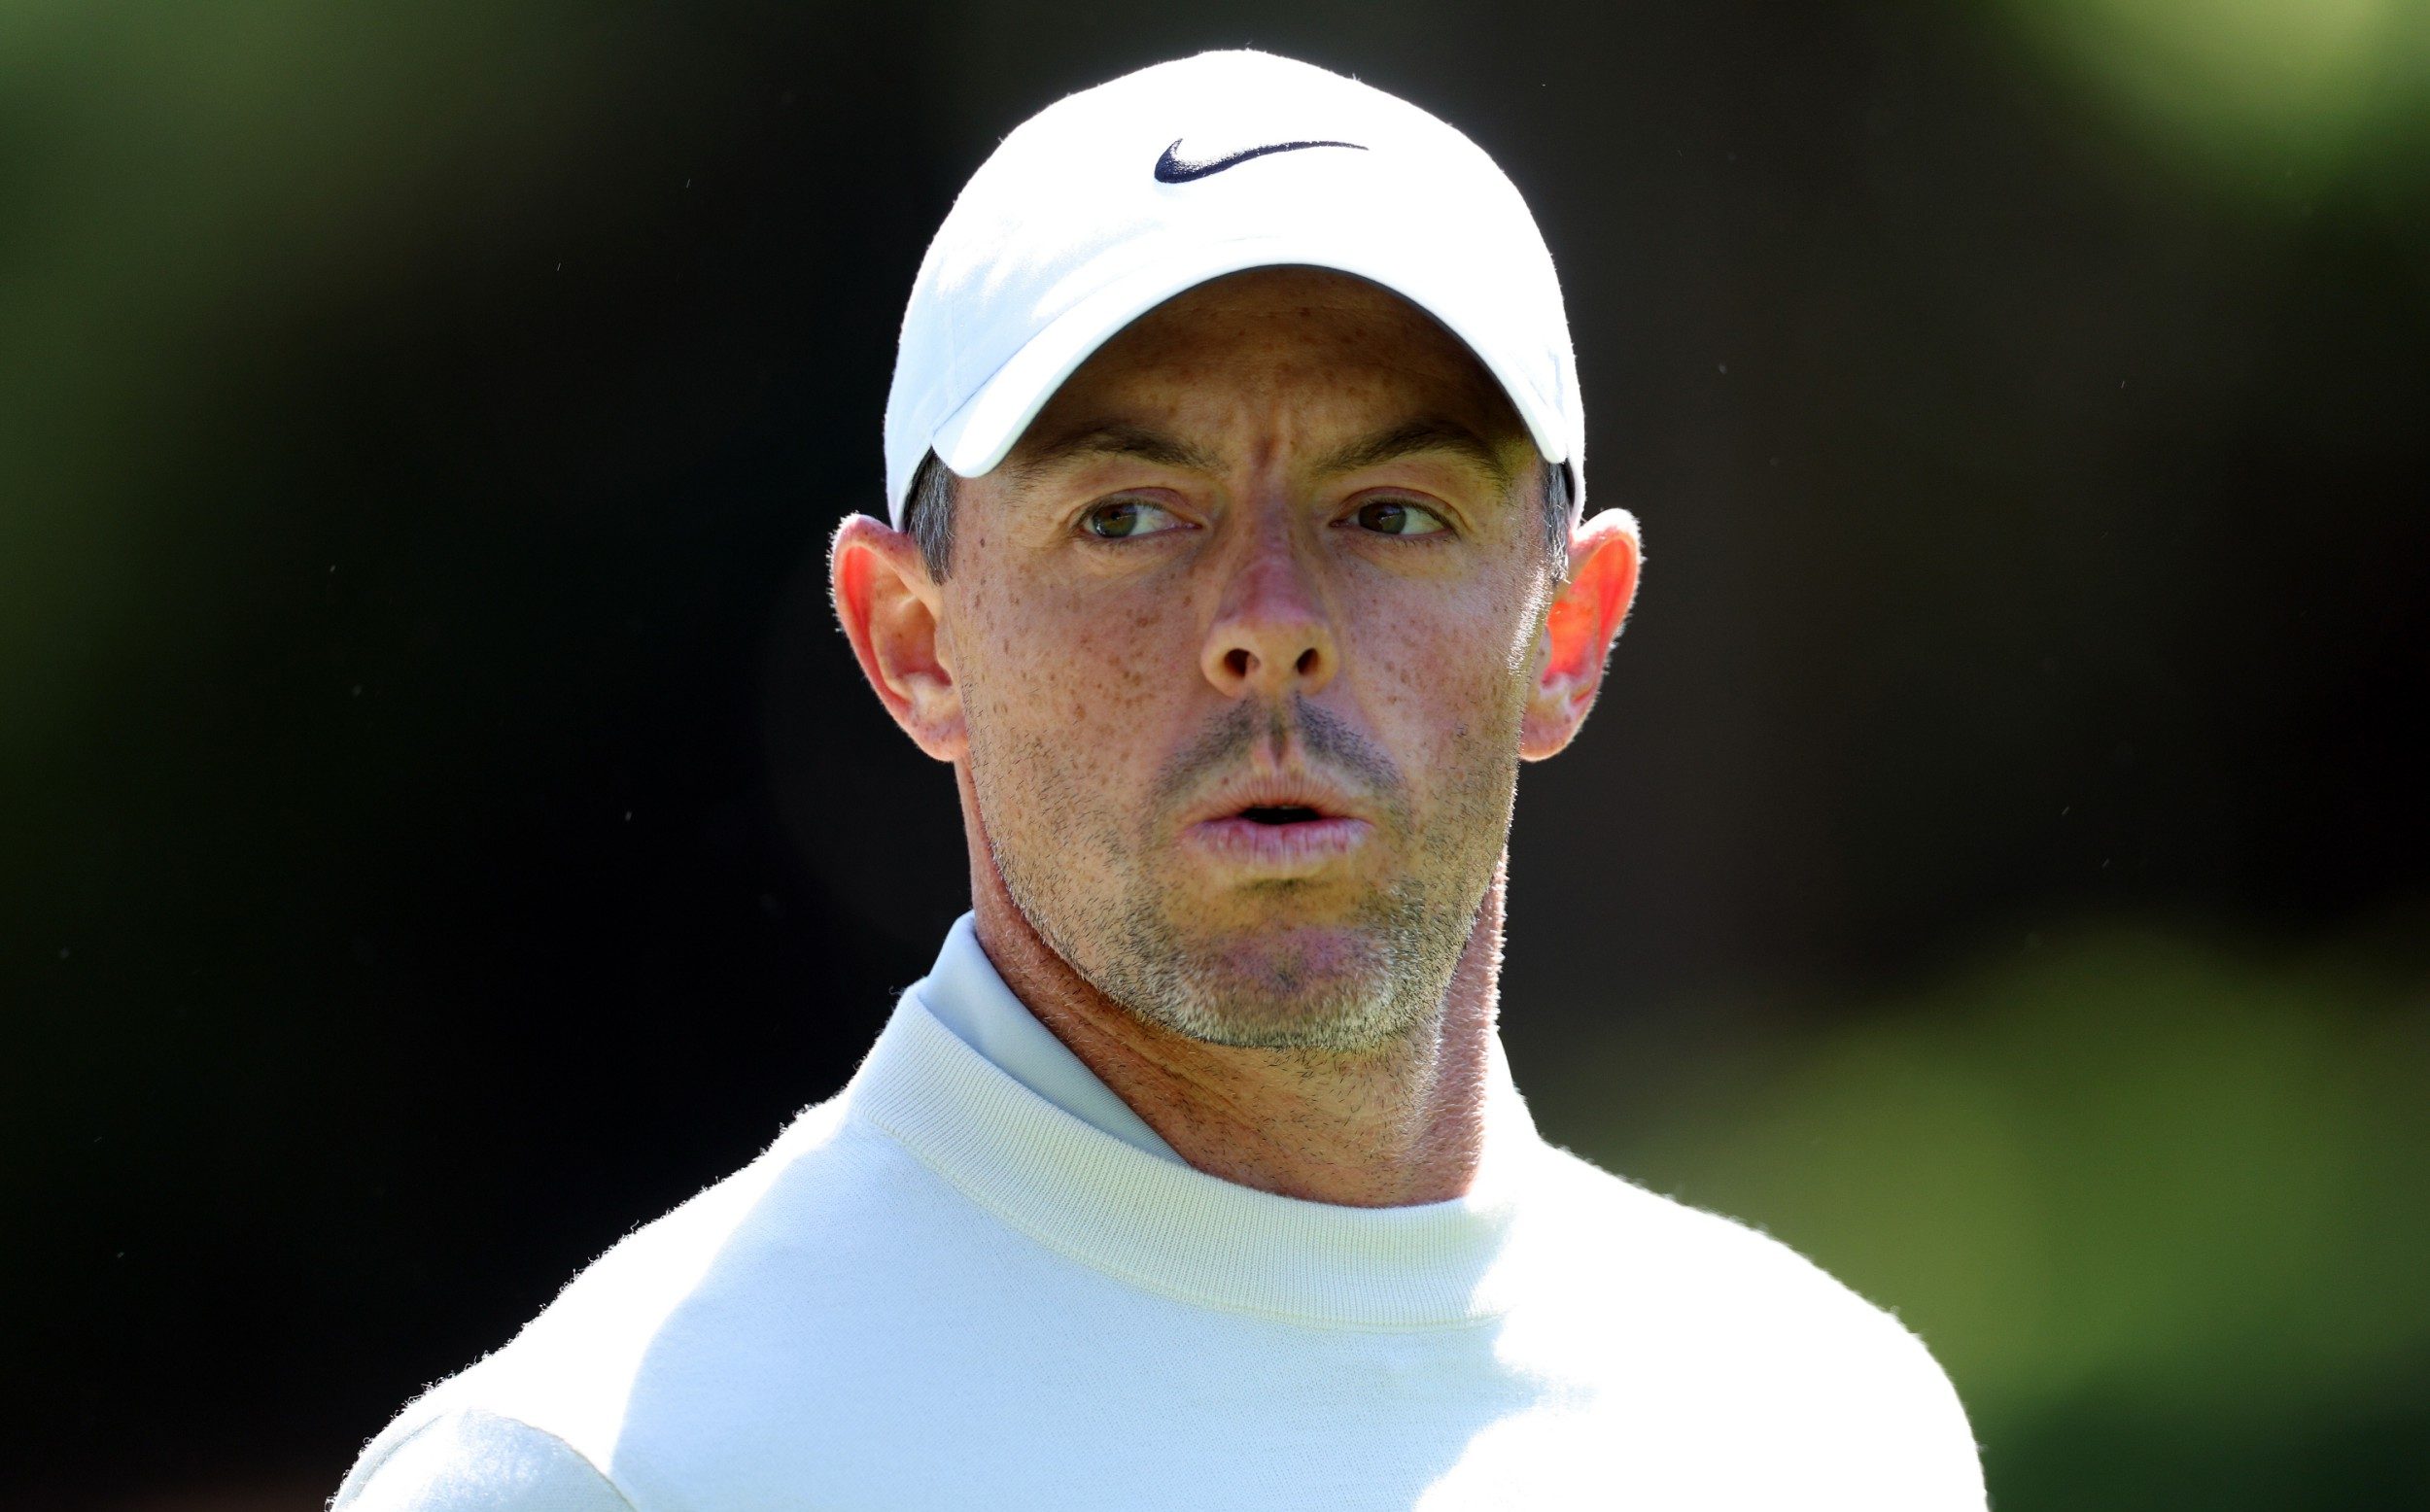 rory mcilroy quashes £750m liv rumours and commits to pga tour for life